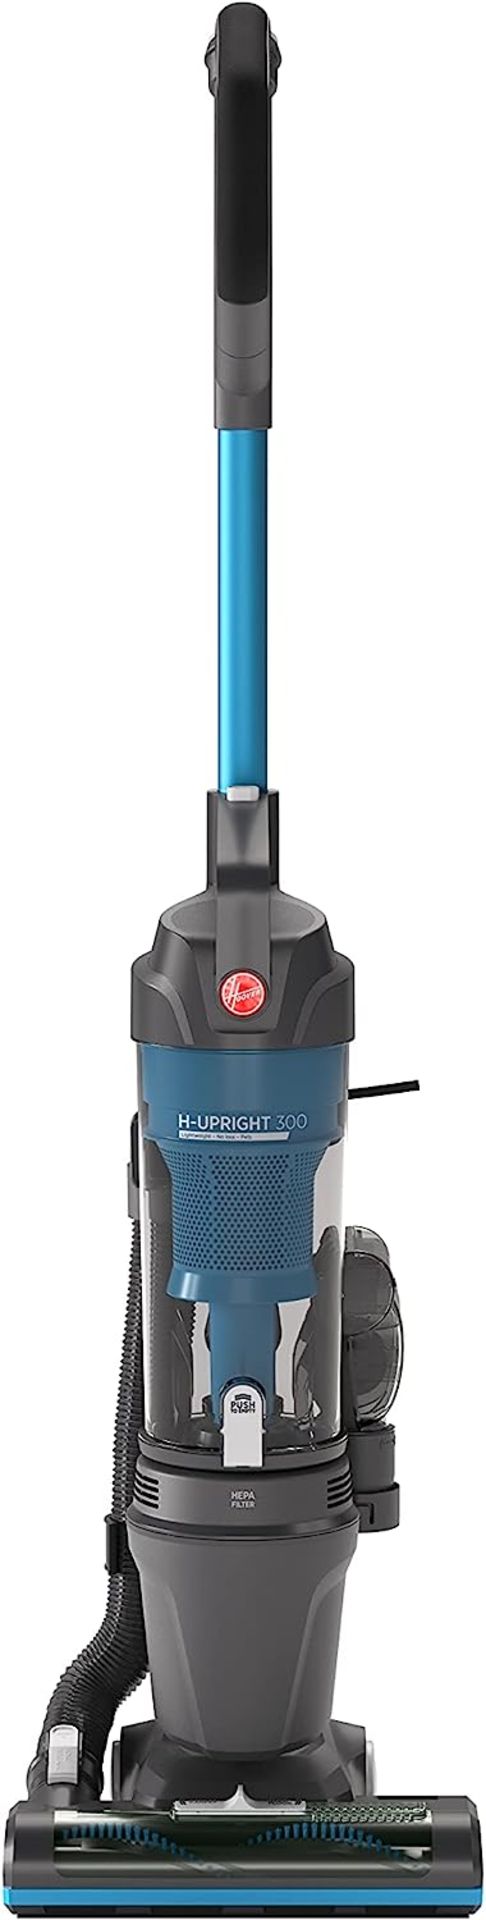 Hoover Upright Pet Vacuum Cleaner, Blue - Upright 300 (P5)